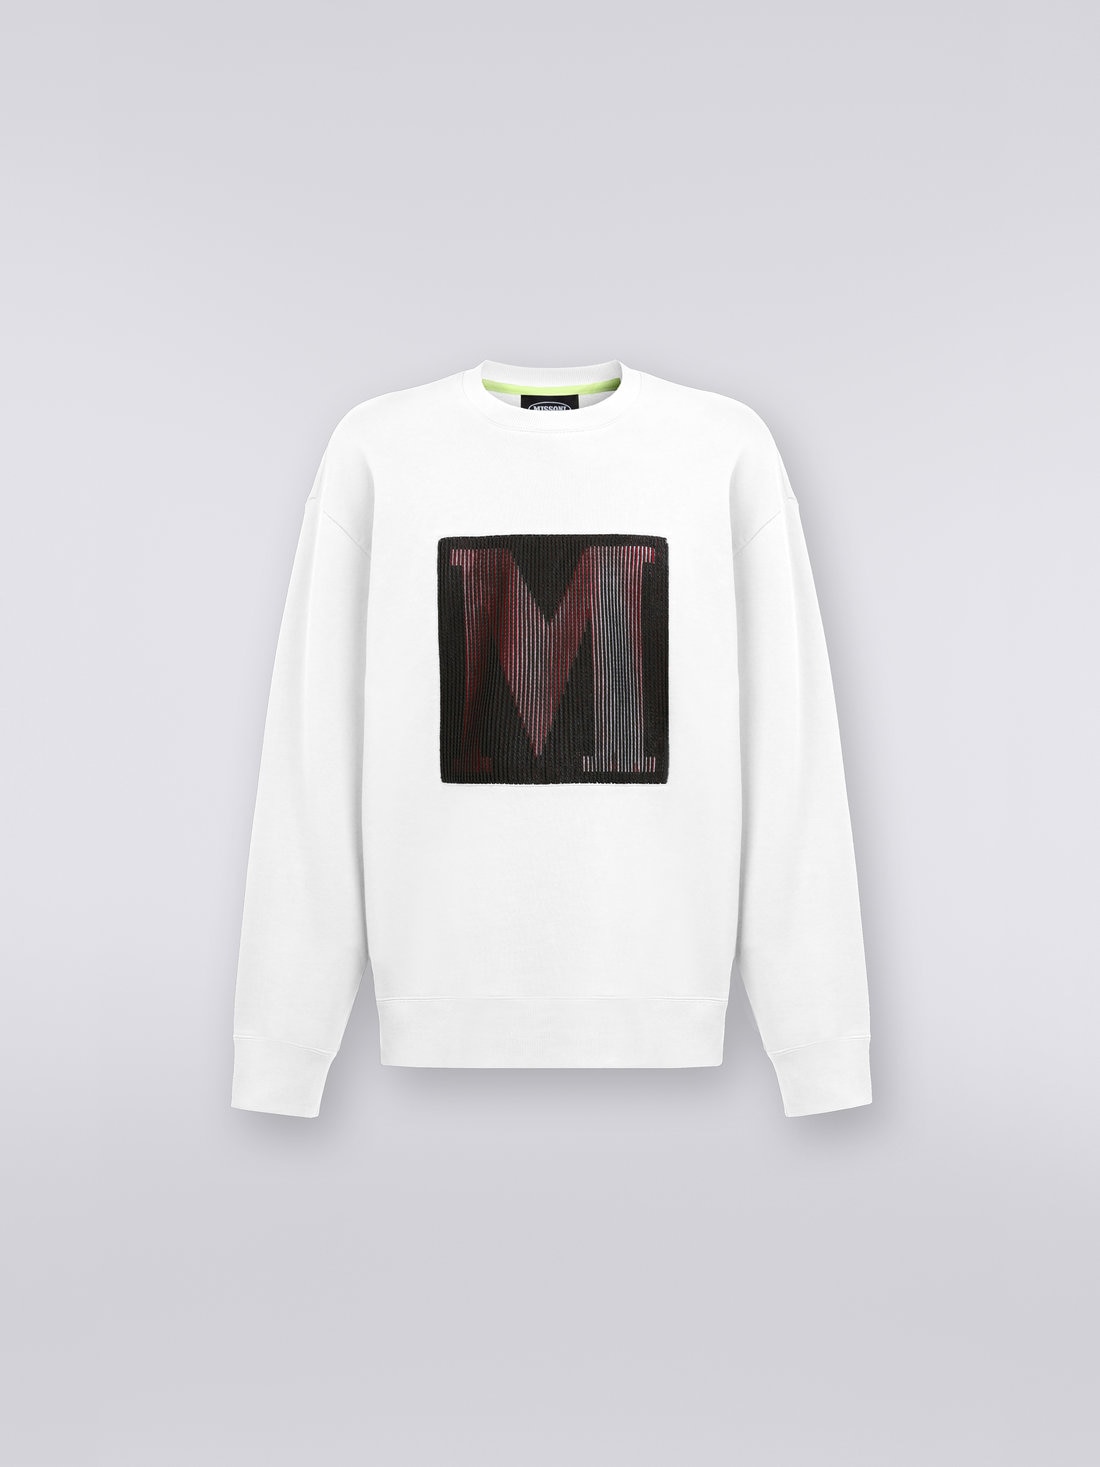 Cotton crew-neck sweatshirt with macro logo in collaboration with Mike Maignan, White - TS23SW05BJ00HYS019Y - 0